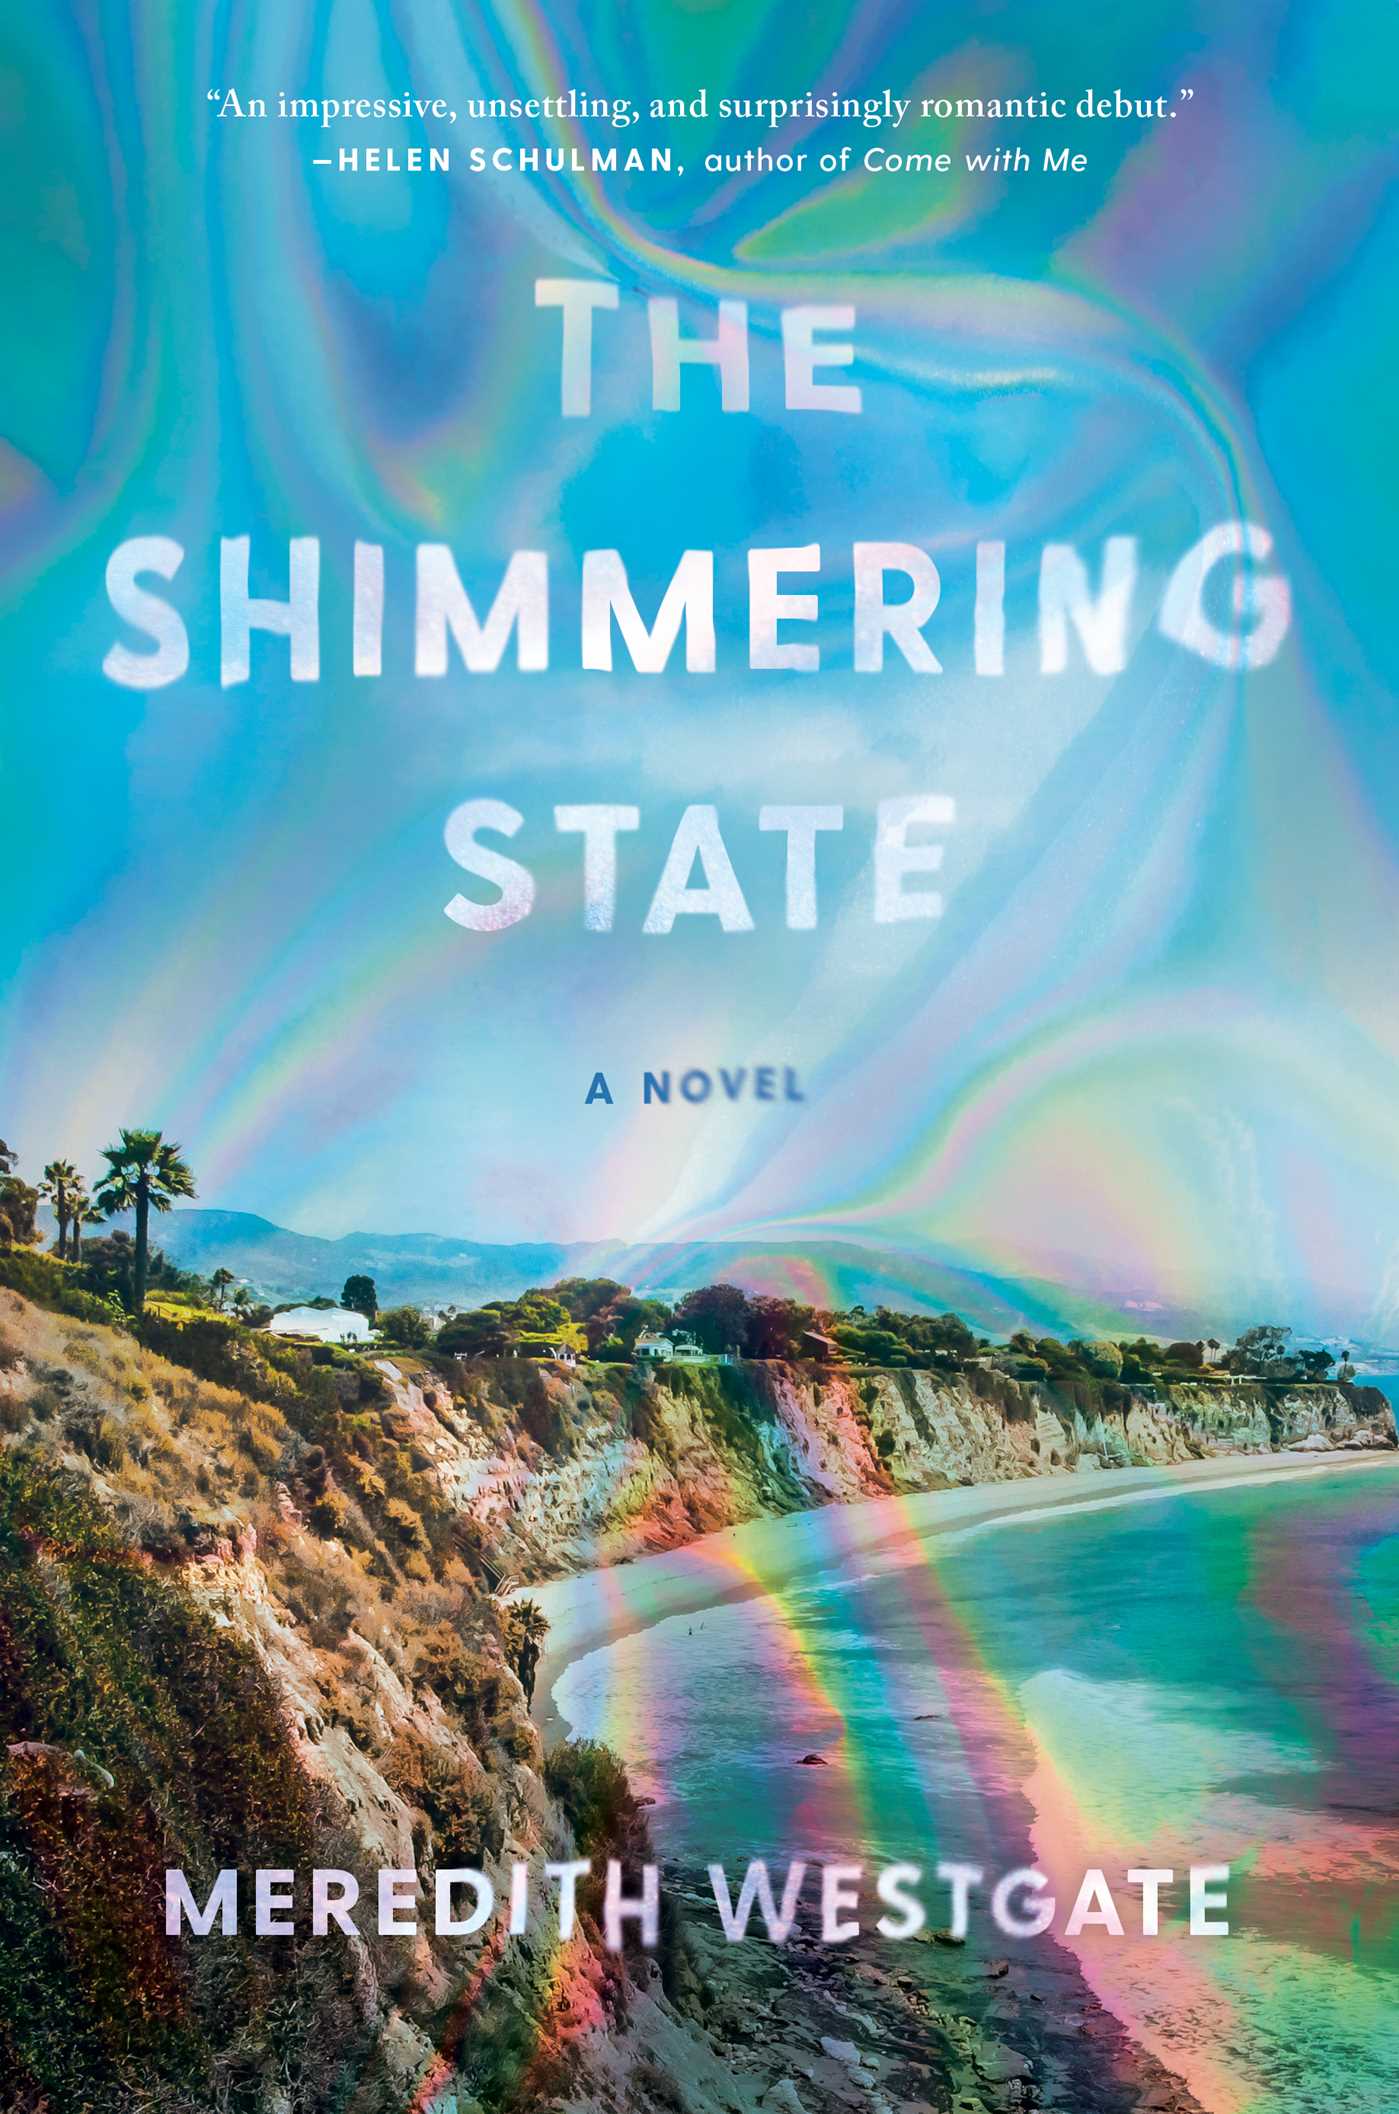 Meredith Westgate’s ‘The Shimmering State’ to be out in paperback on August 16th